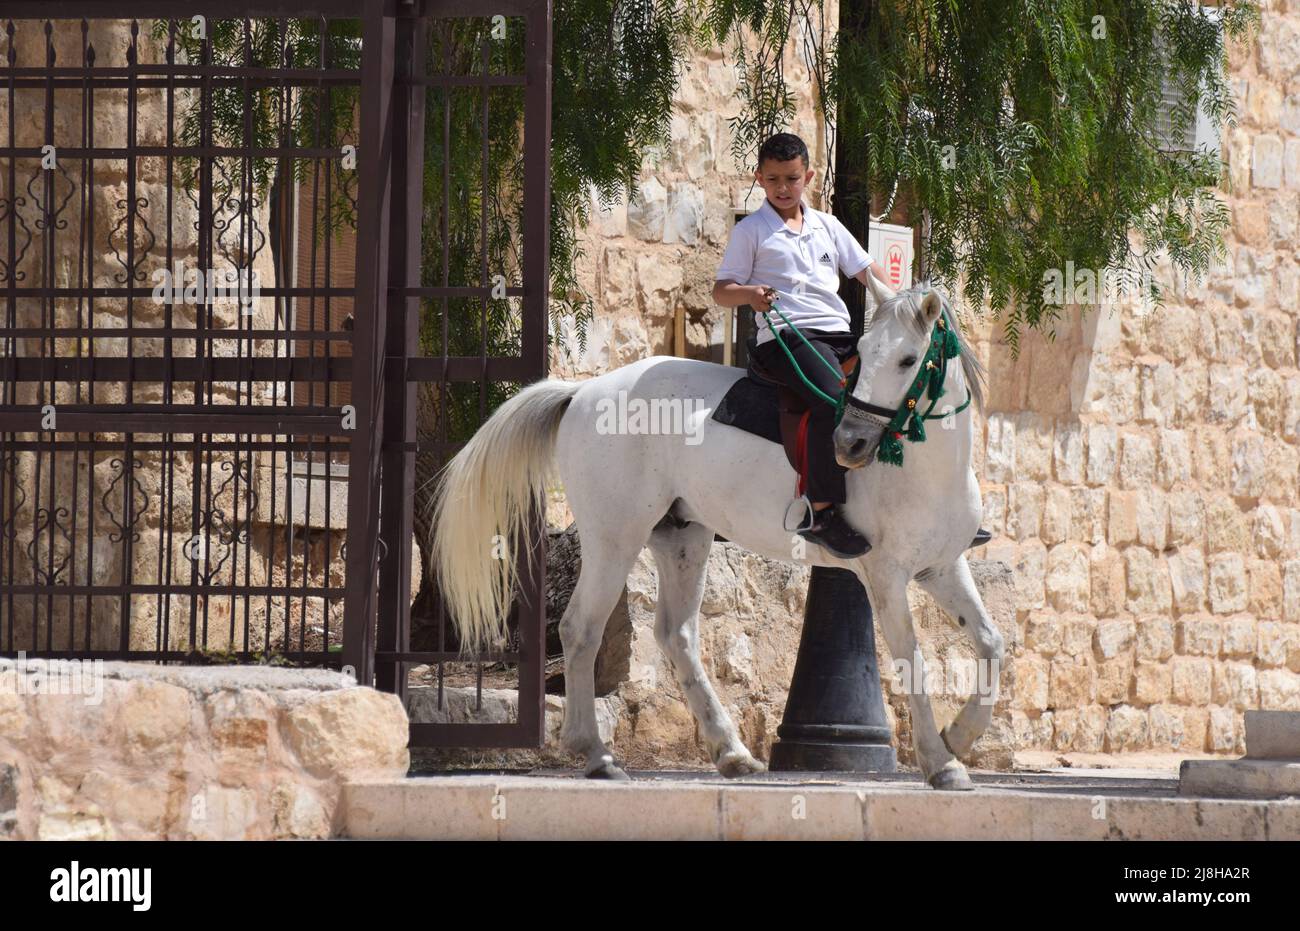 A young boy riding a white horse down some steps in the streets of Mukawir in Jordan Stock Photo